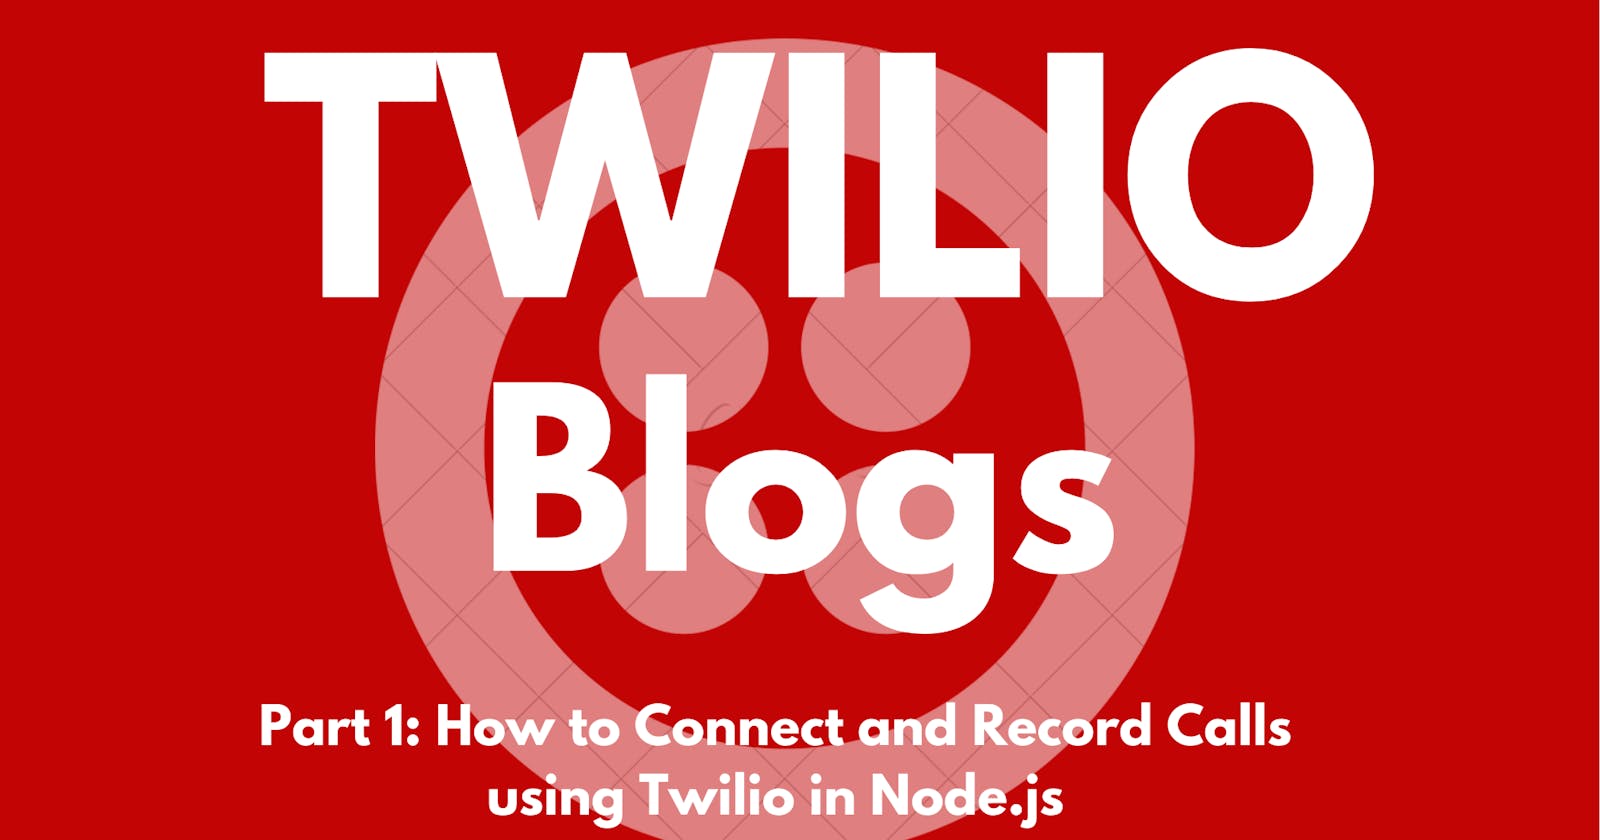 How to Connect and Record Calls using Twilio :Part 1